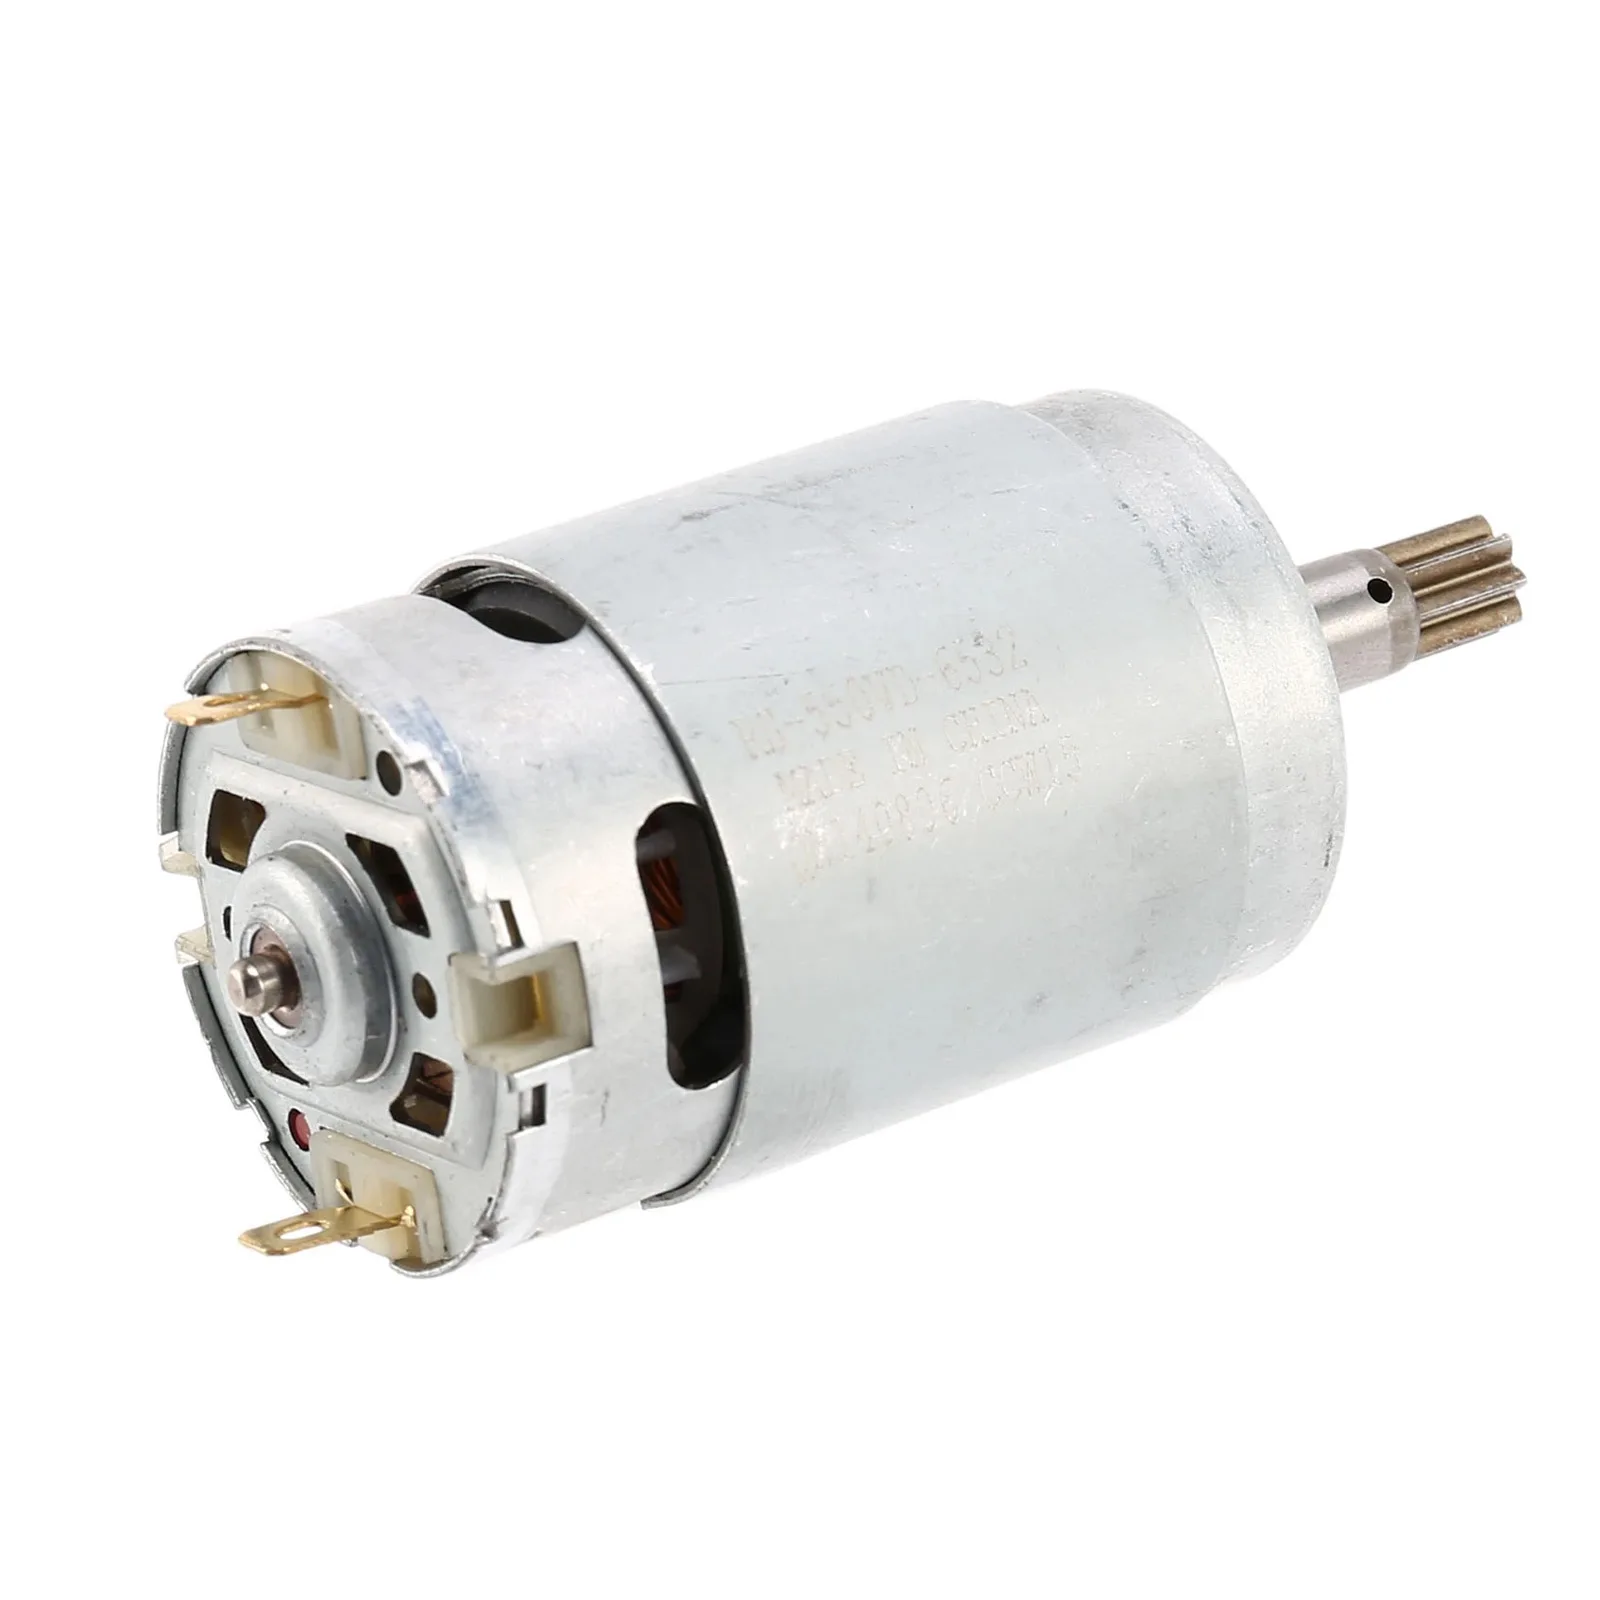 

DC18V 8 Teeth Motor RS-550VD-6532 H3 For WORX 50027484 WU390 WX390 WX390.1 Tooth Pitch 7.7mm Motor Power Tool Accessories